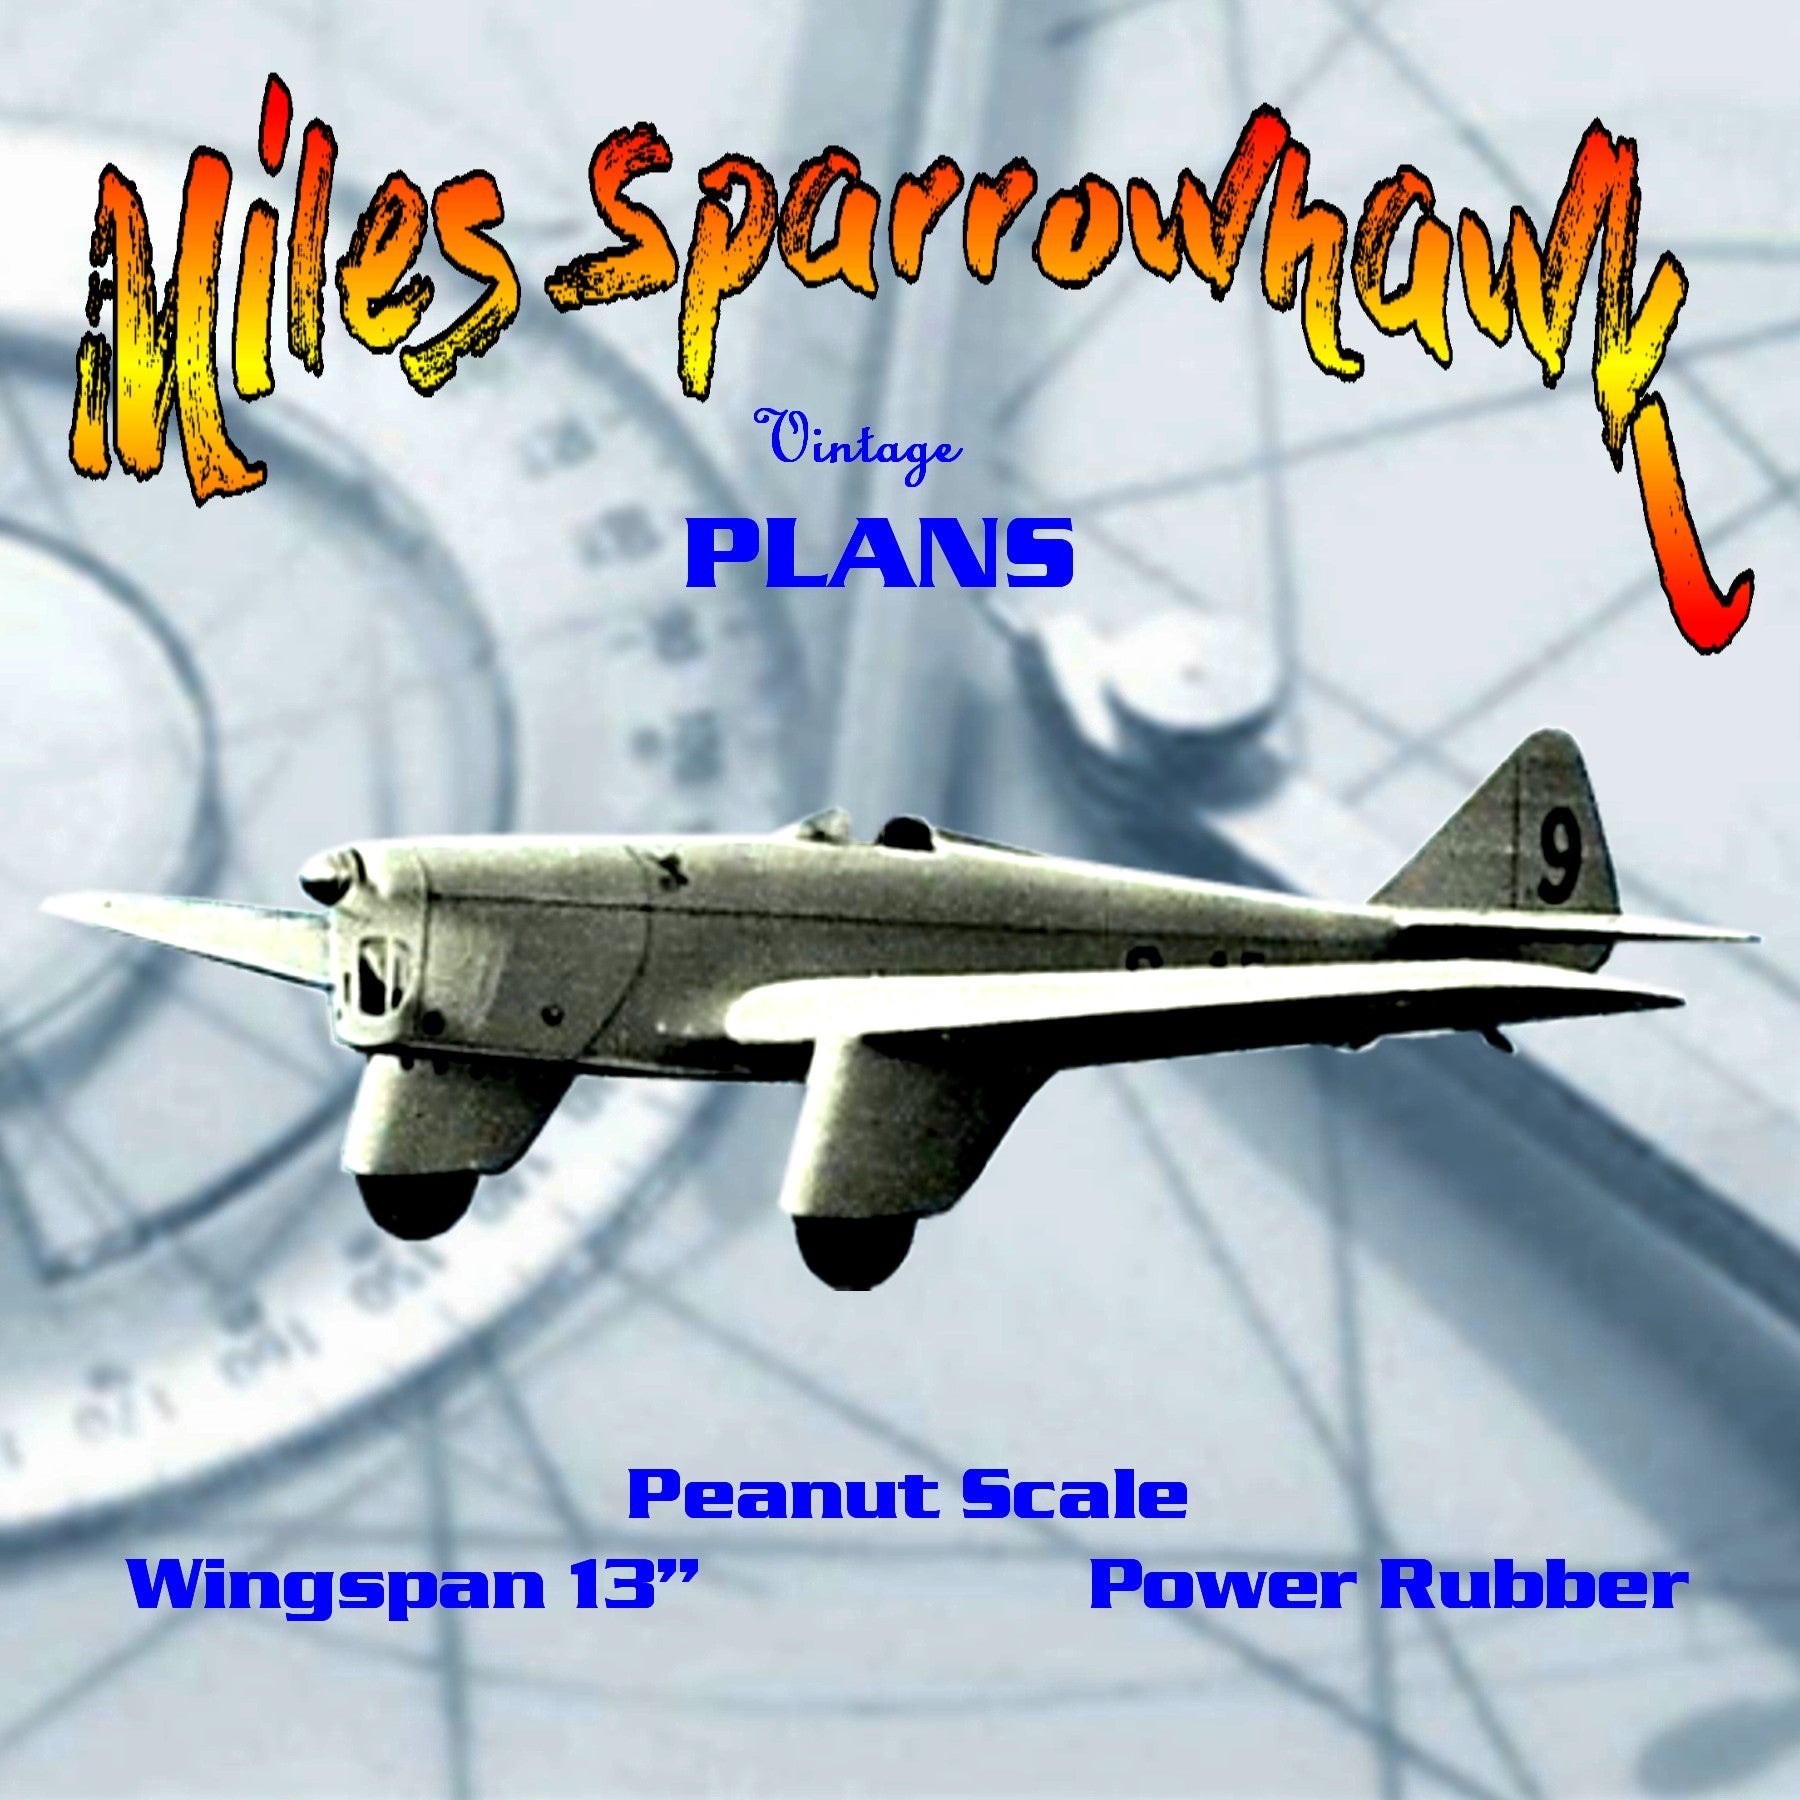 full size printed plans peanut scale "miles sparrowhawk" here's a sleek low-winger that continually pushes